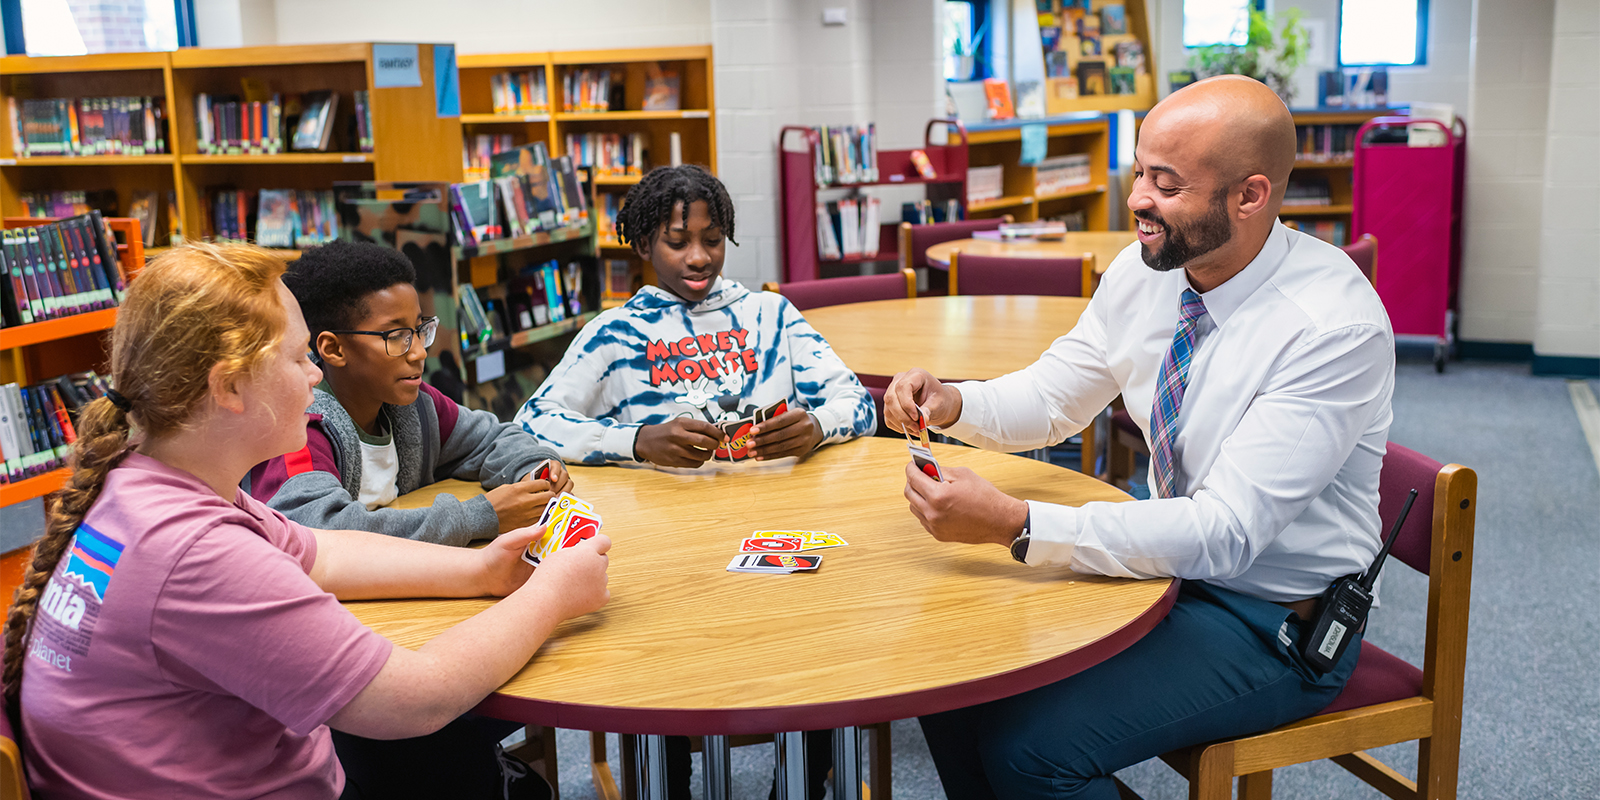 Whitman Assistant Principal Matthew Johnson joins in a game of UNO with students.